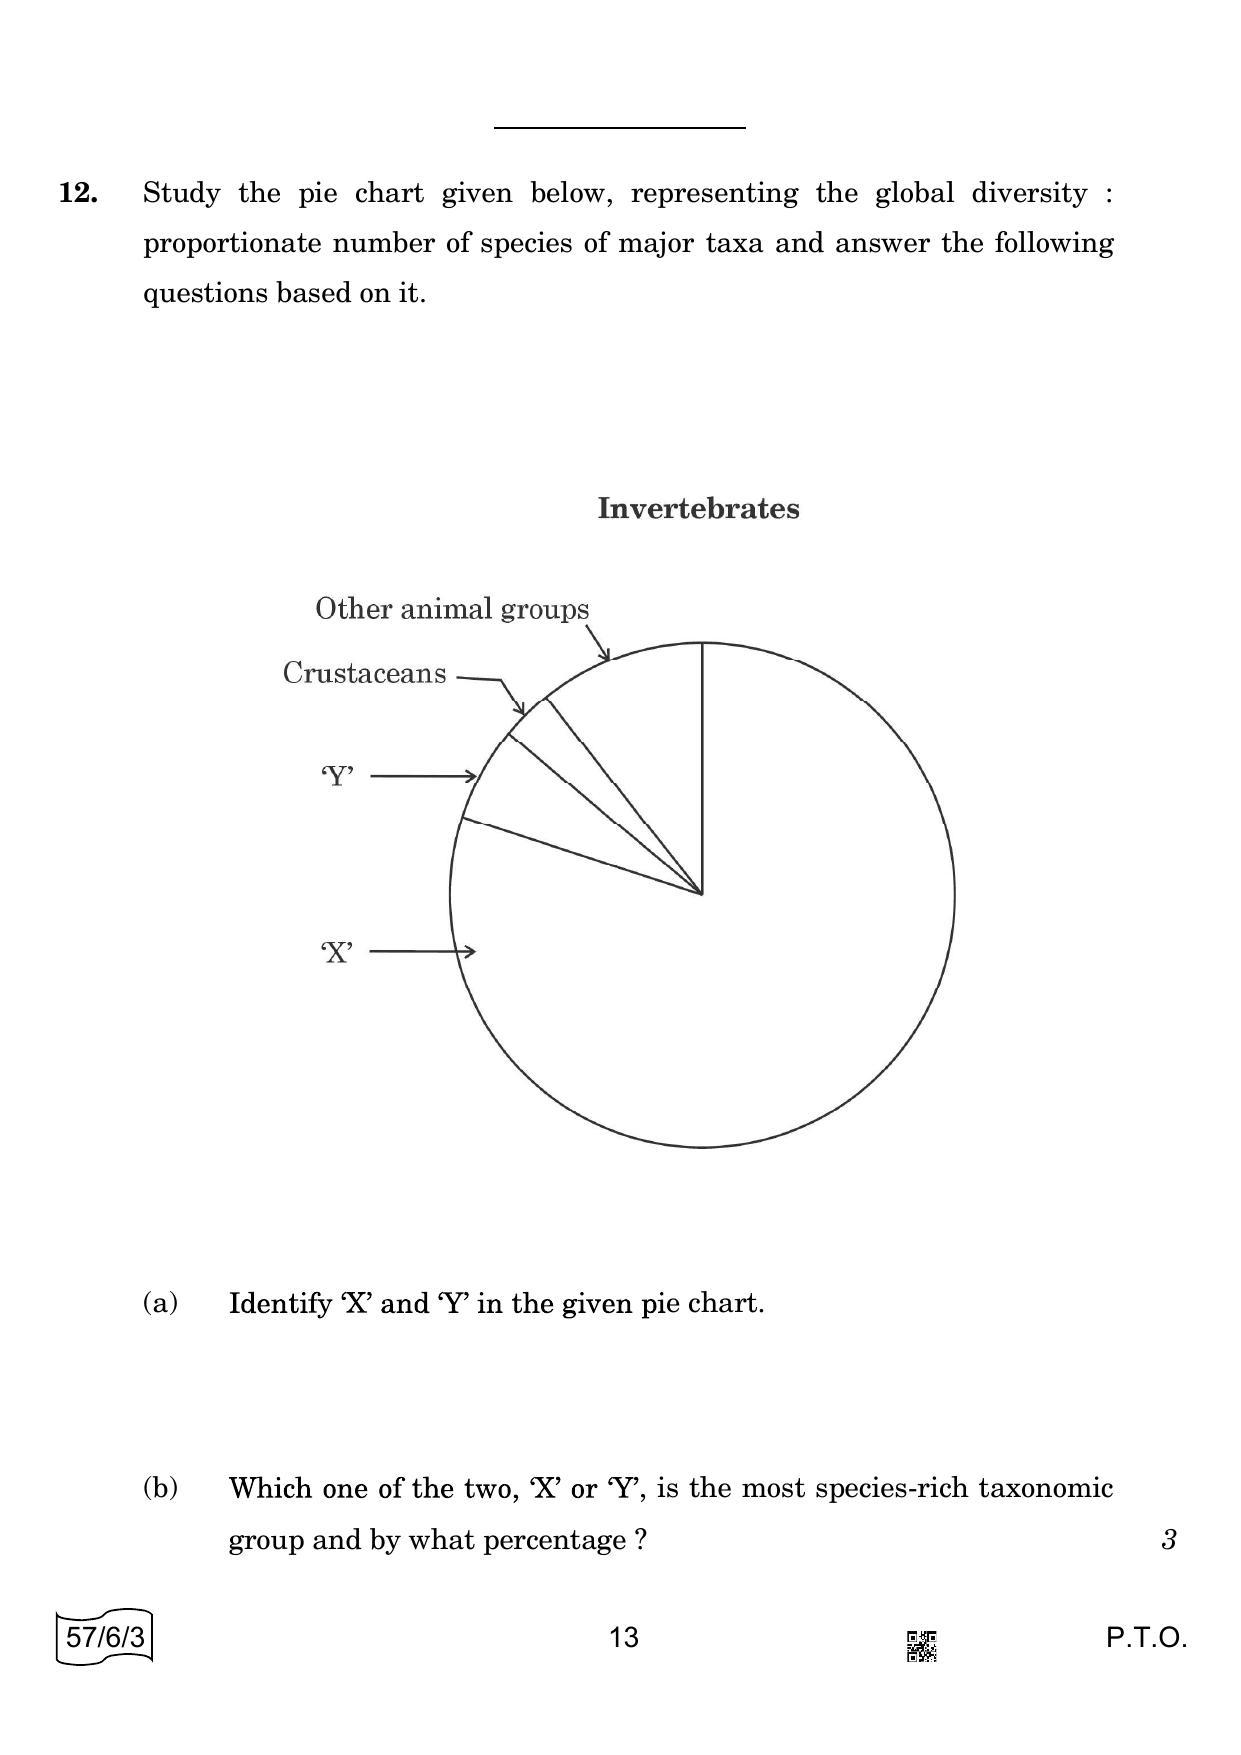 CBSE Class 12 57-6-3 BIOLOGY 2022 Compartment Question Paper - Page 13